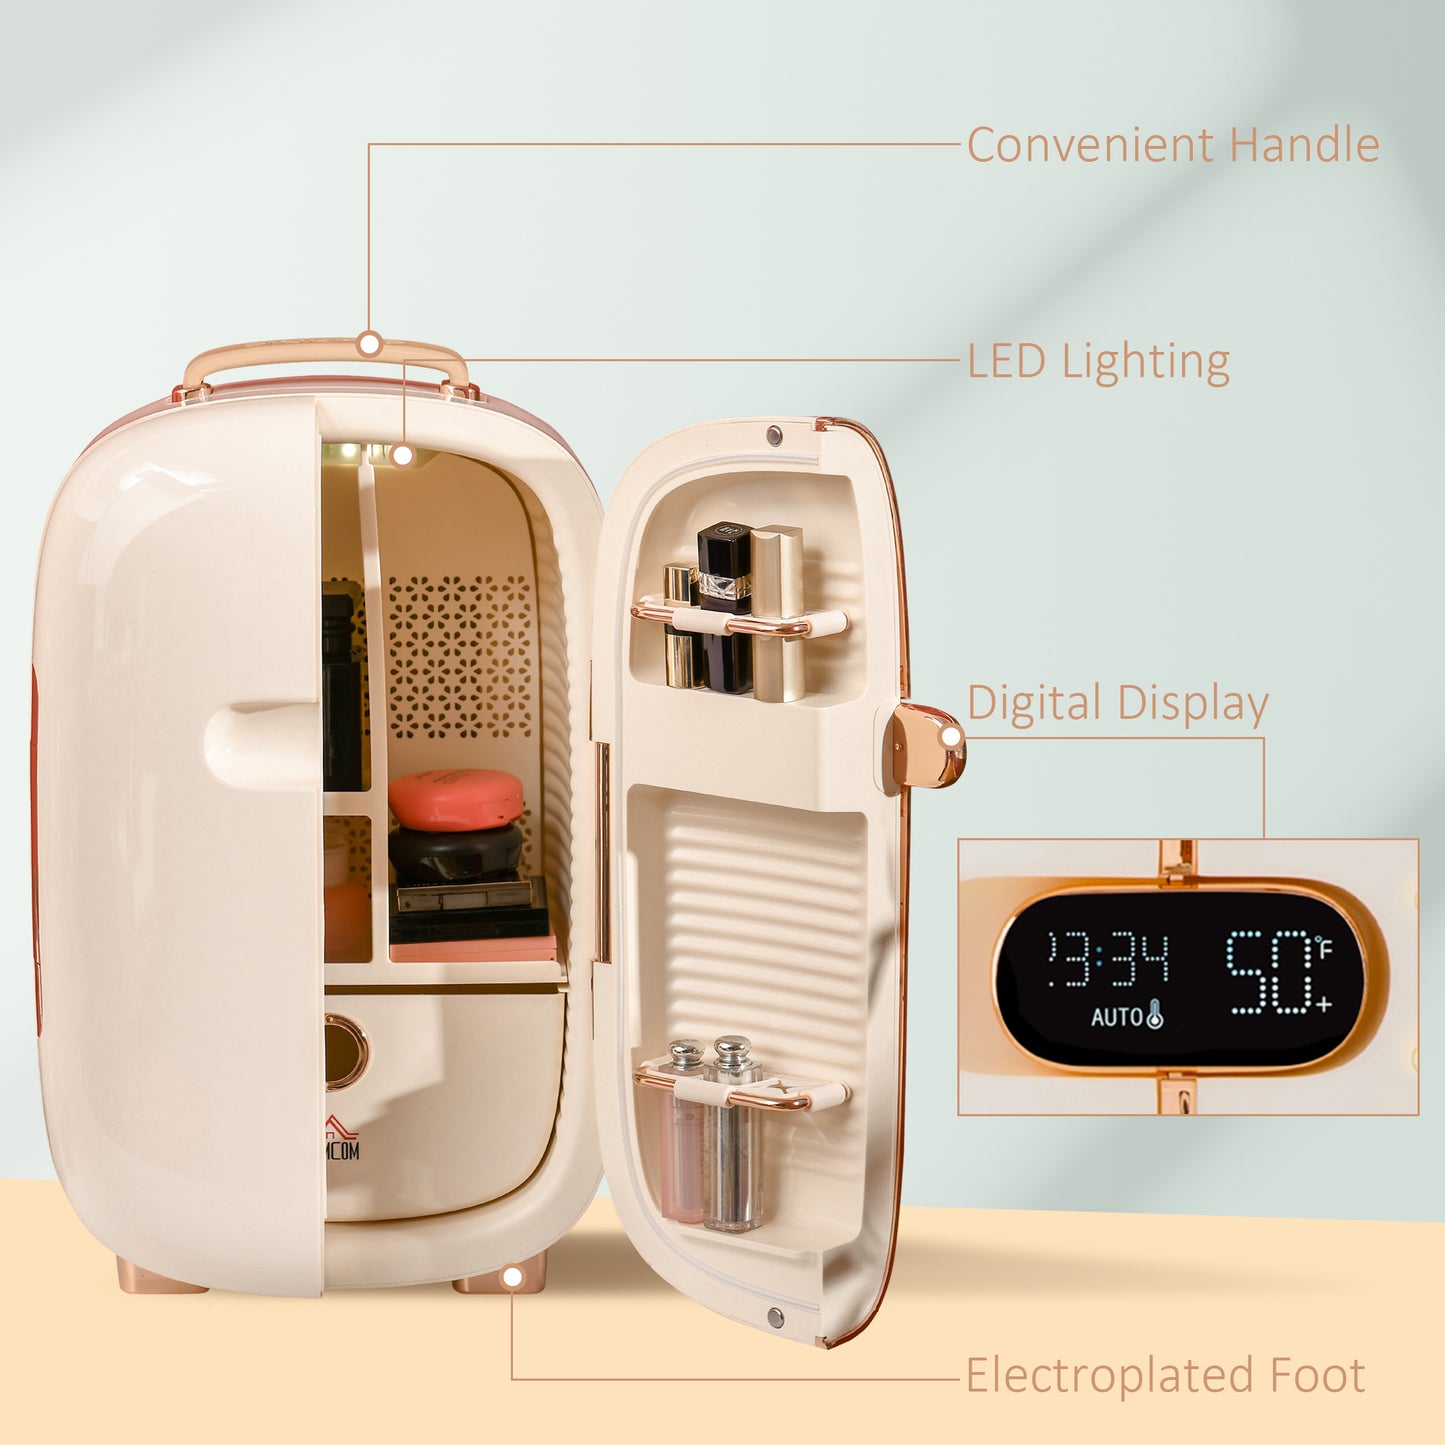 HOMCOM Portable Skincare Fridge with LED Display, 12L Mini Fridge for Beauty, Makeup and Cosmetics, Small Refrigerator Cooler for Bedroom, Home Office, Desktop, White